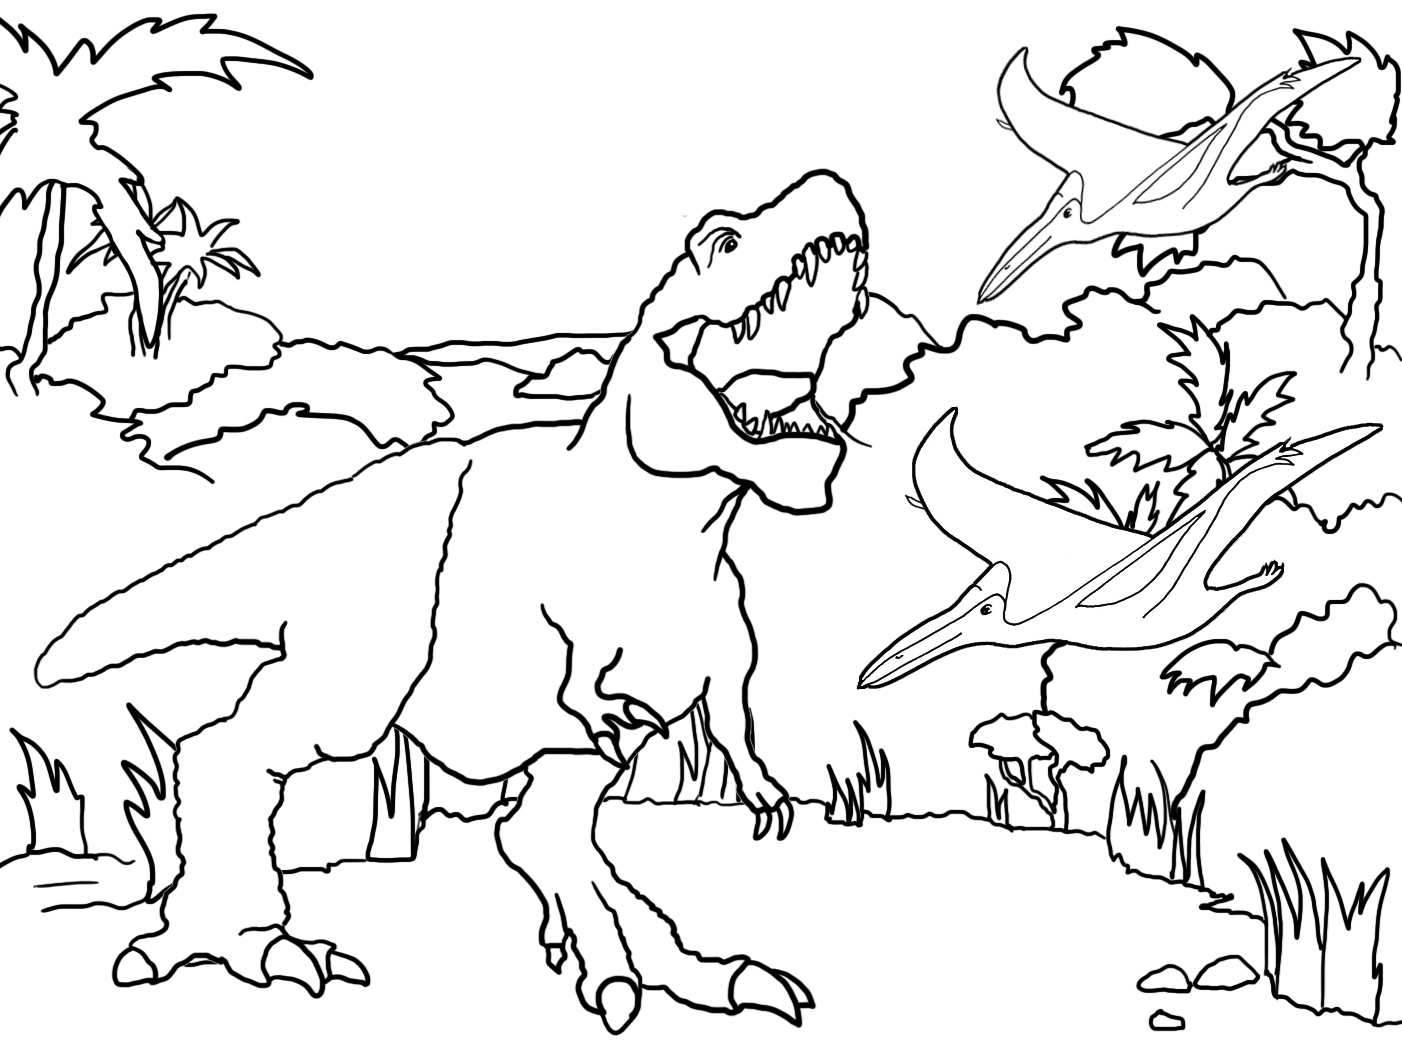 landscape with Tyrannosaurus rex and flying dinos